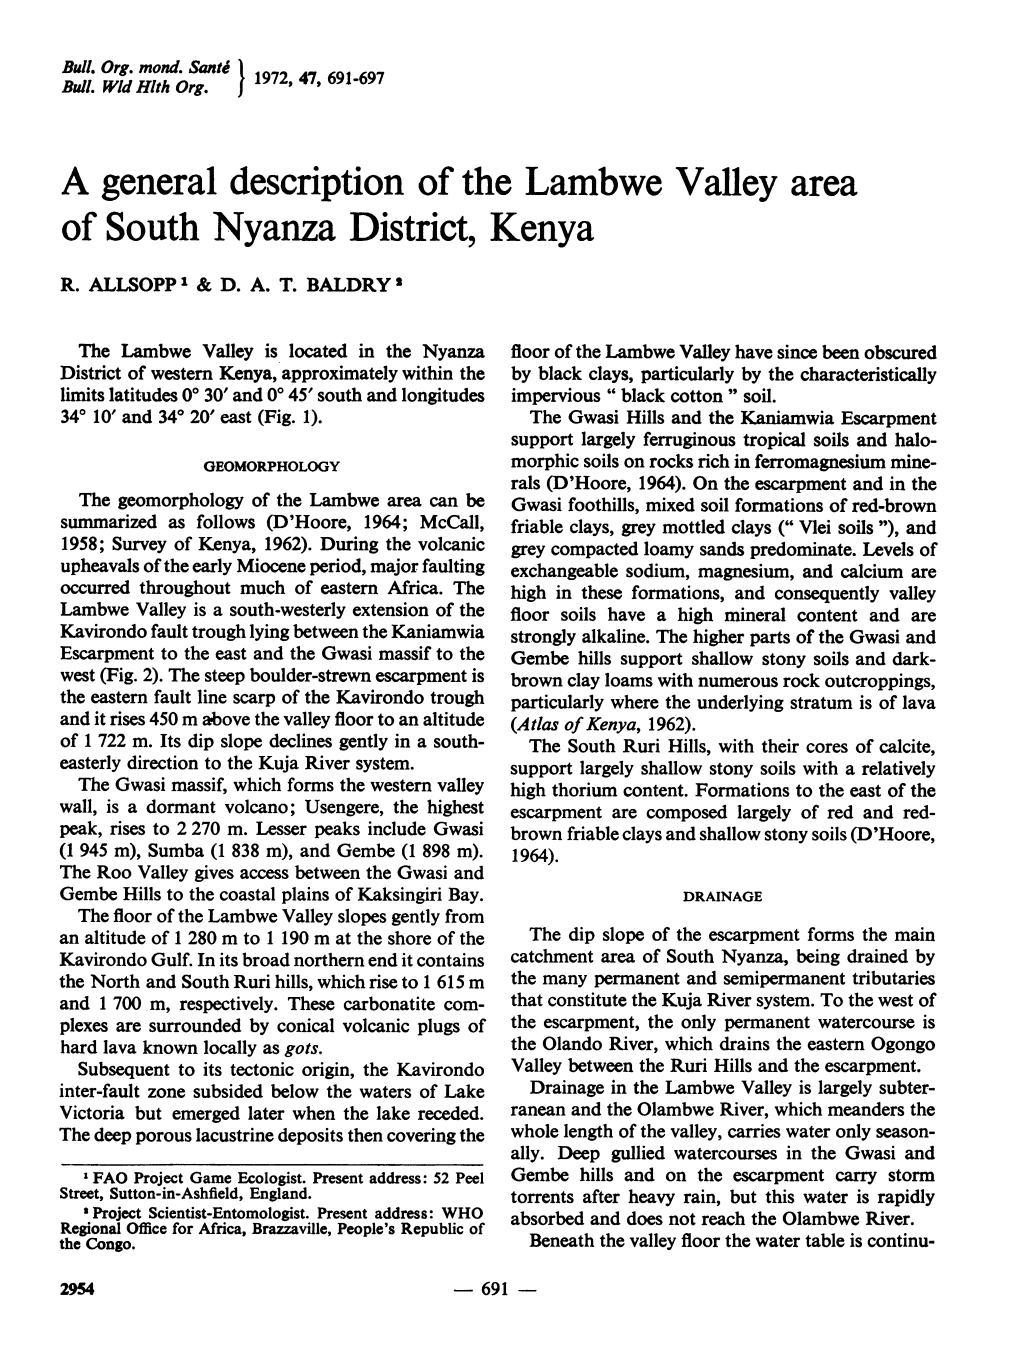 A General Description of the Lambwe Valley Area of South Nyanza District, Kenya R